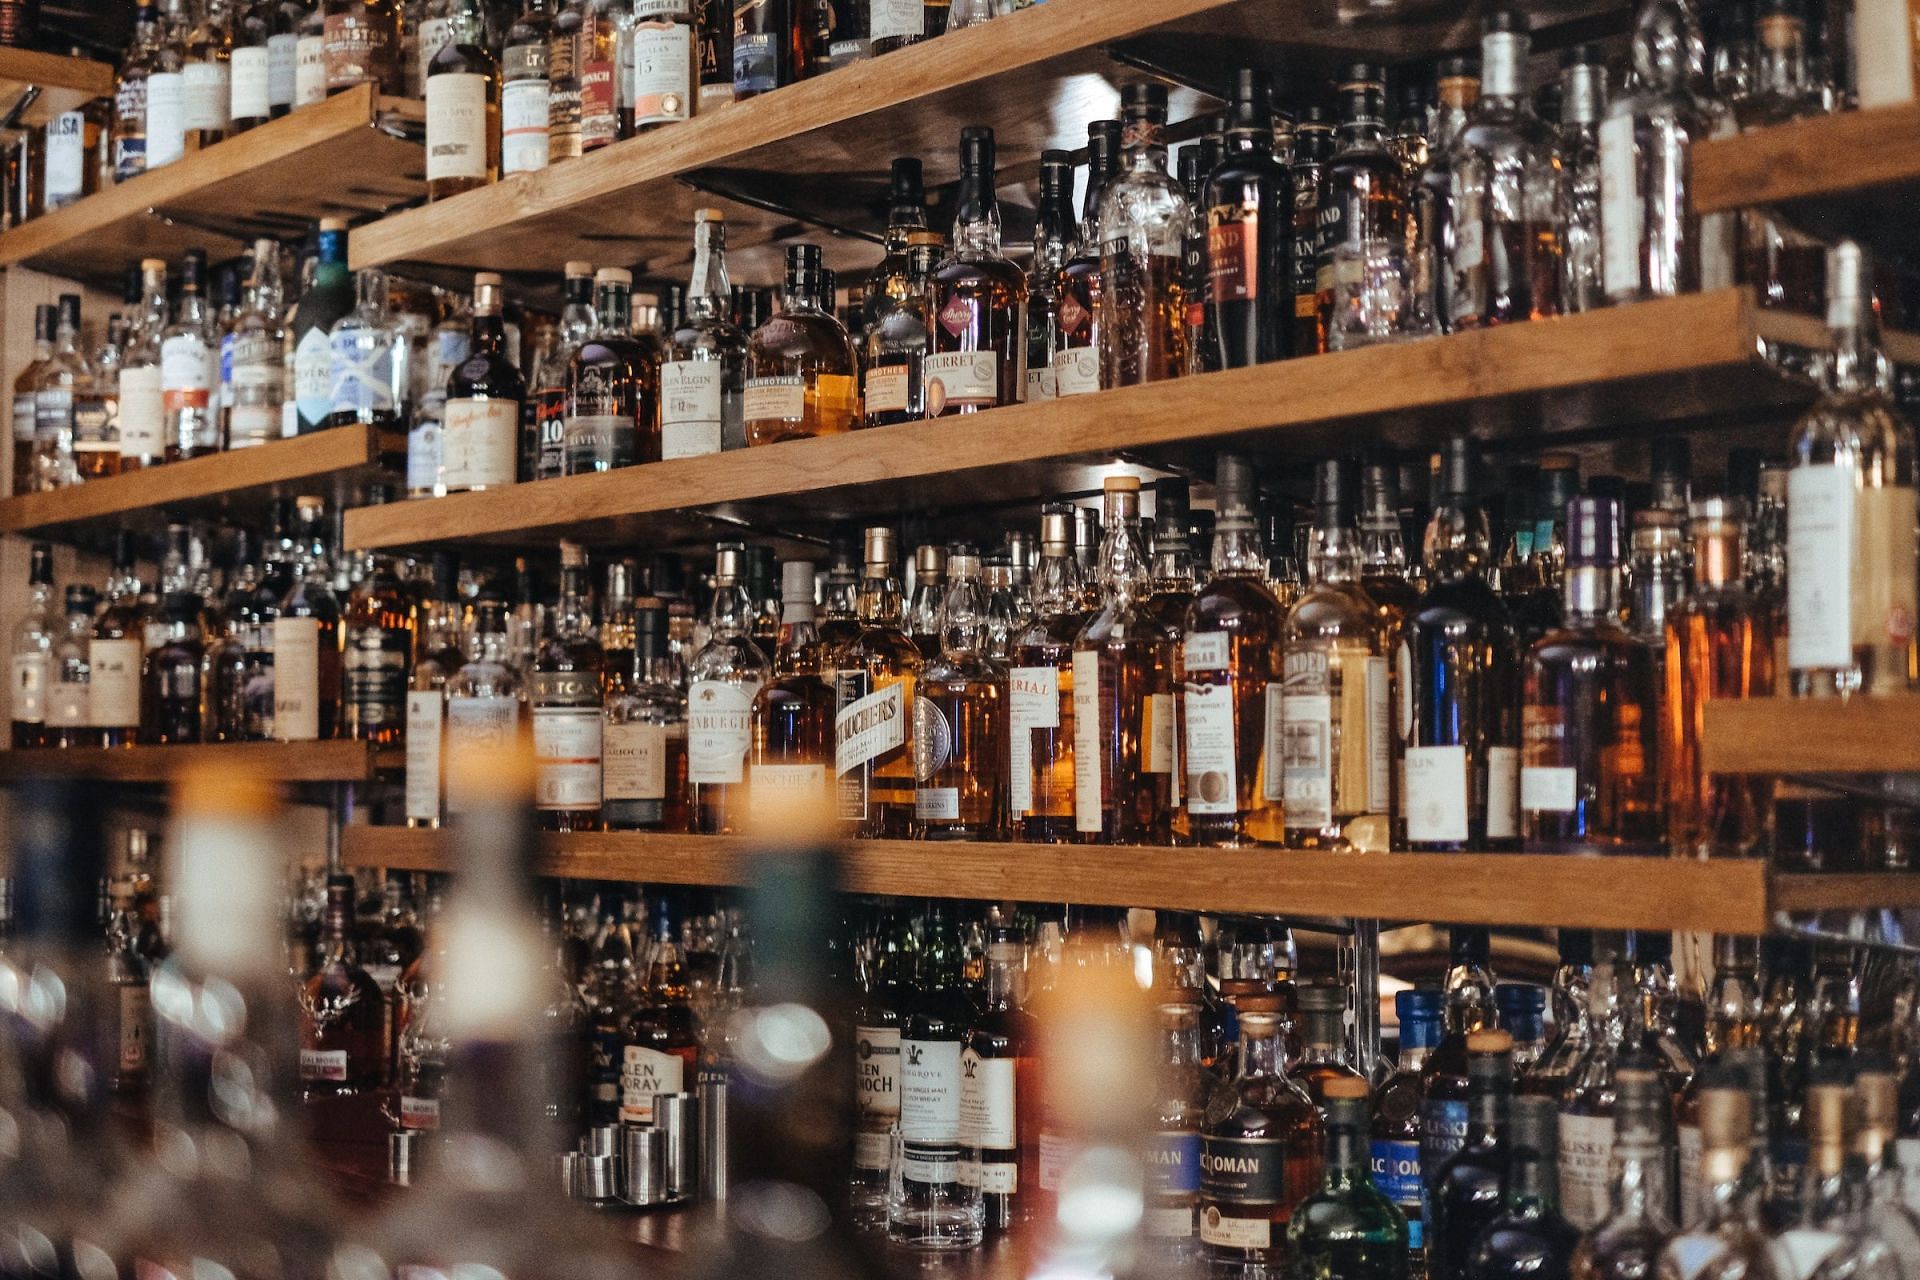 What are the safety tips to follow for drinking alcohol? (Photo by Adam Wilson on Unsplash)